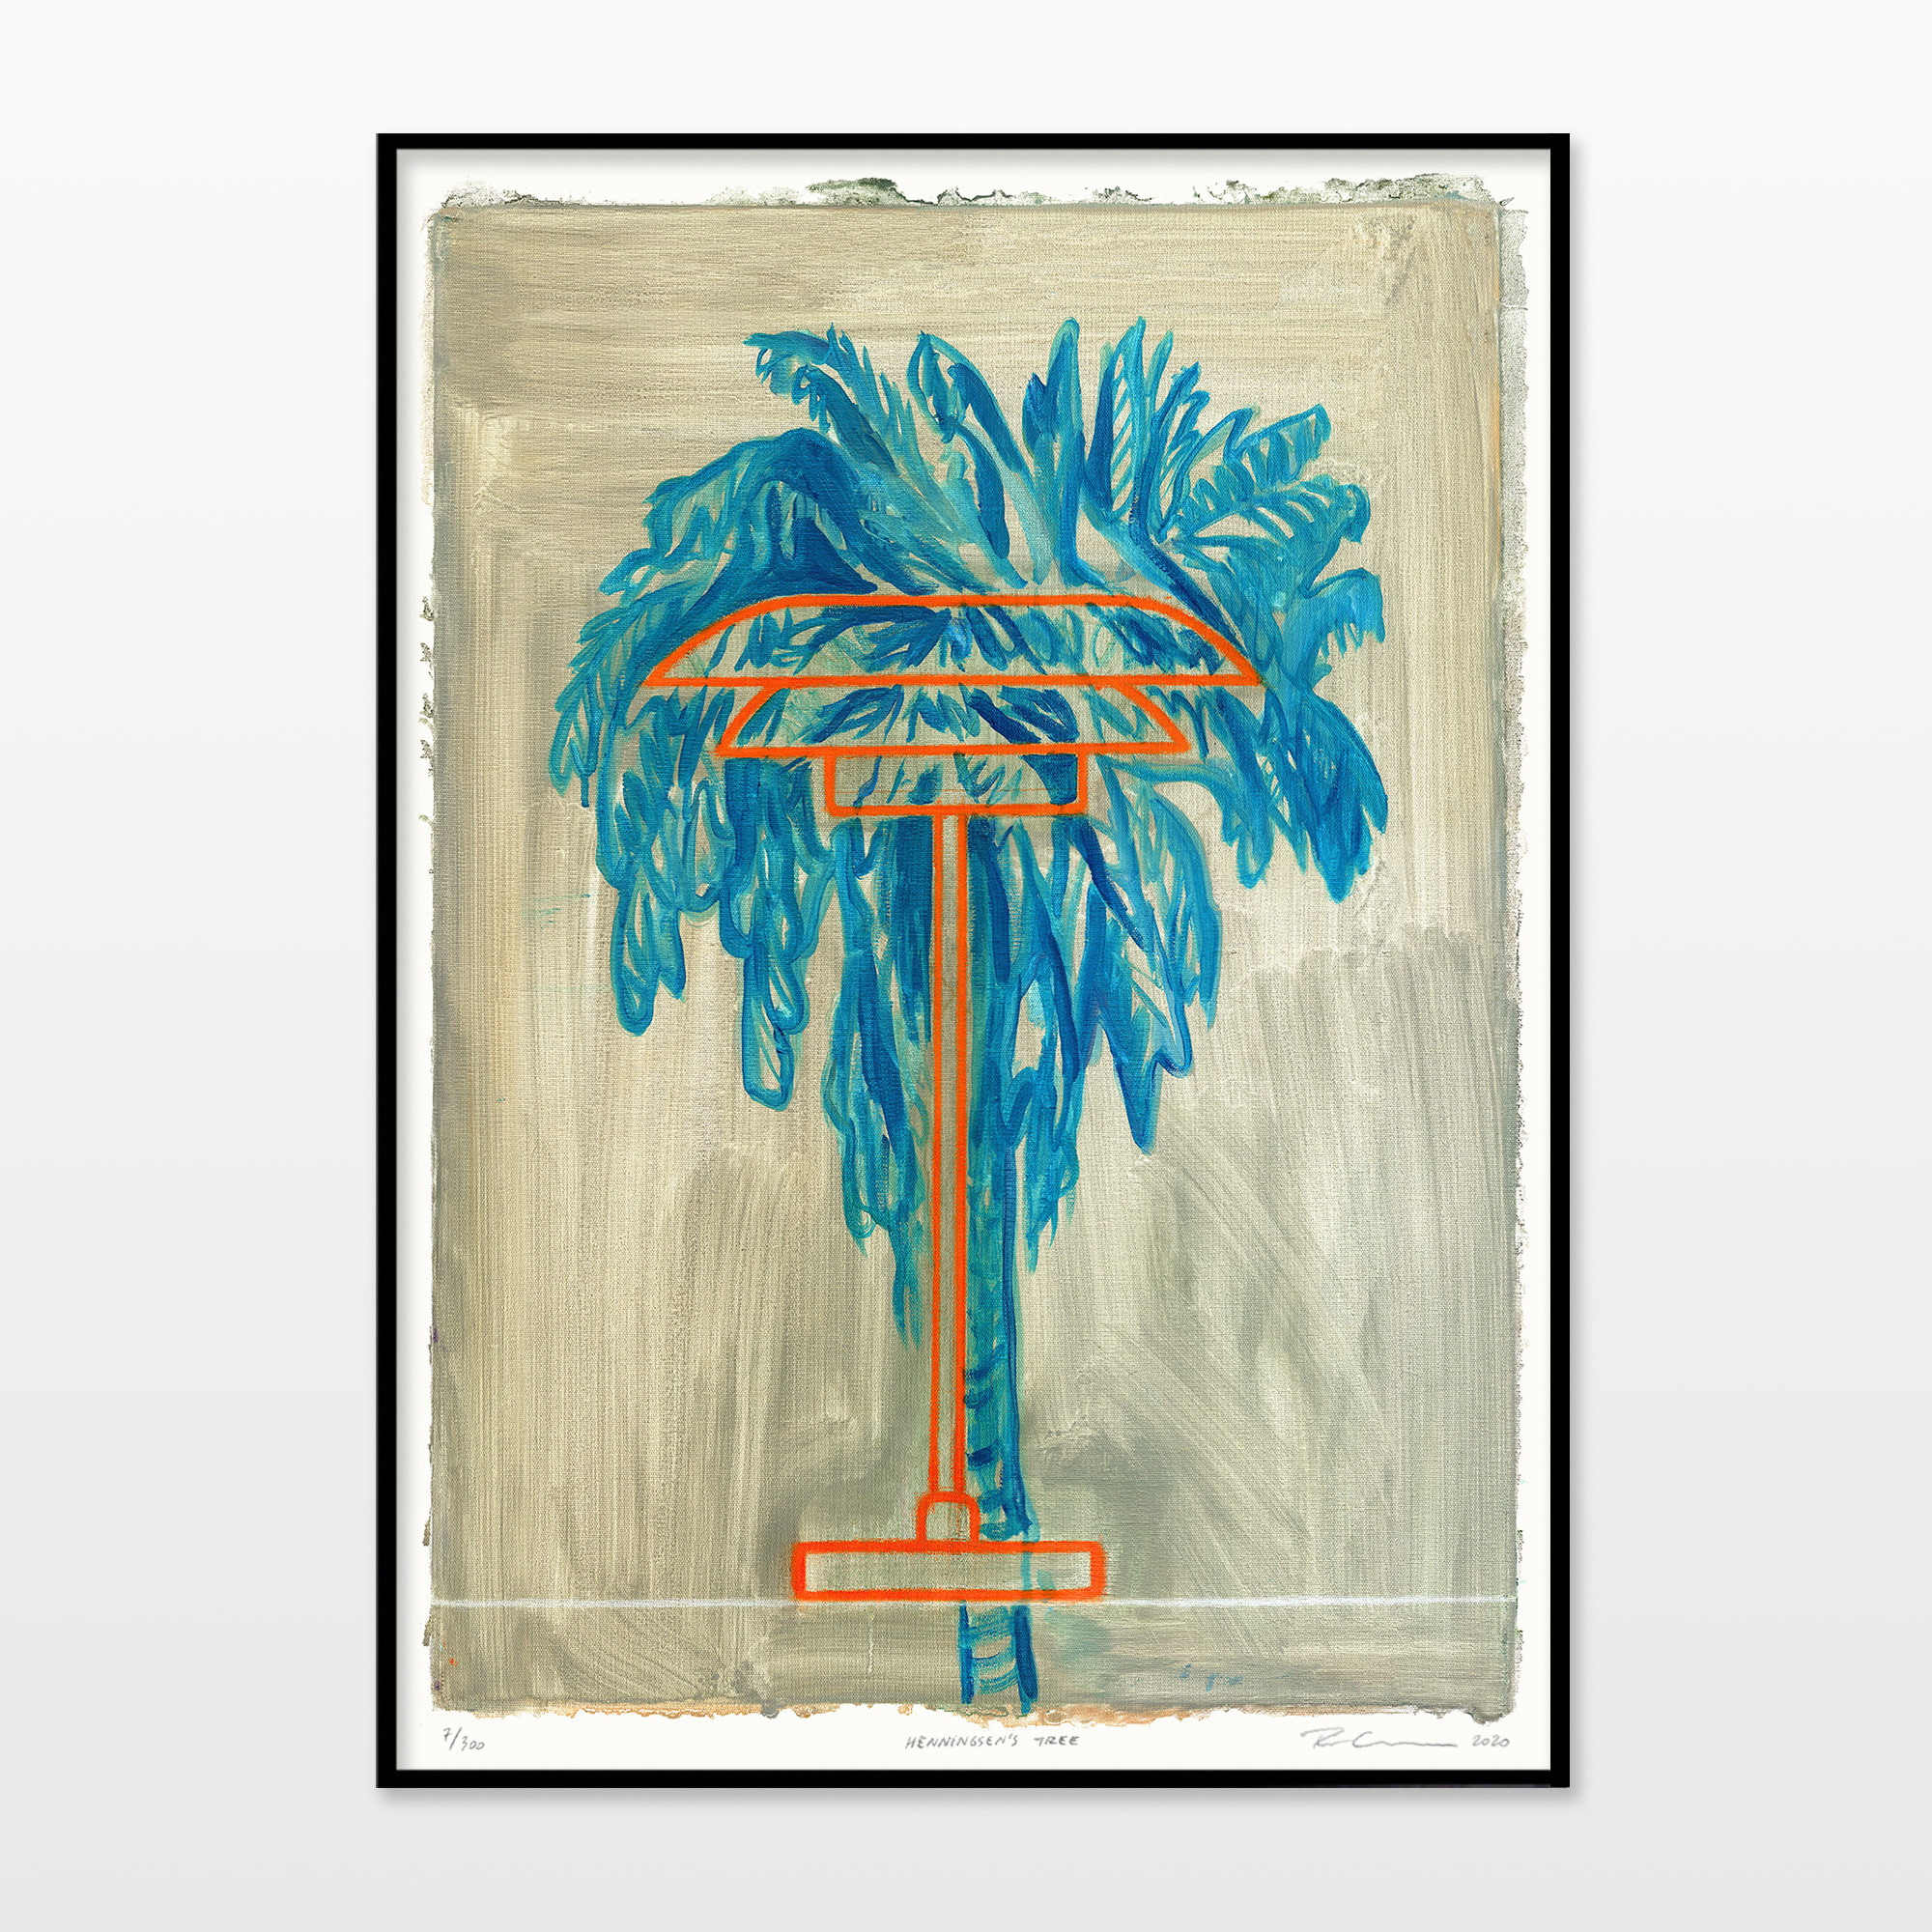 posters-prints, giclee-print, aesthetic, figurative, graphical, illustrative, architecture, botany, nature, technology, beige, blue, brown, orange, turquoise, ink, paper, architectural, contemporary-art, copenhagen, danish, design, interior, interior-design, modern, modern-art, nordic, plants, posters, prints, scandinavien, trees, Buy original high quality art. Paintings, drawings, limited edition prints & posters by talented artists.